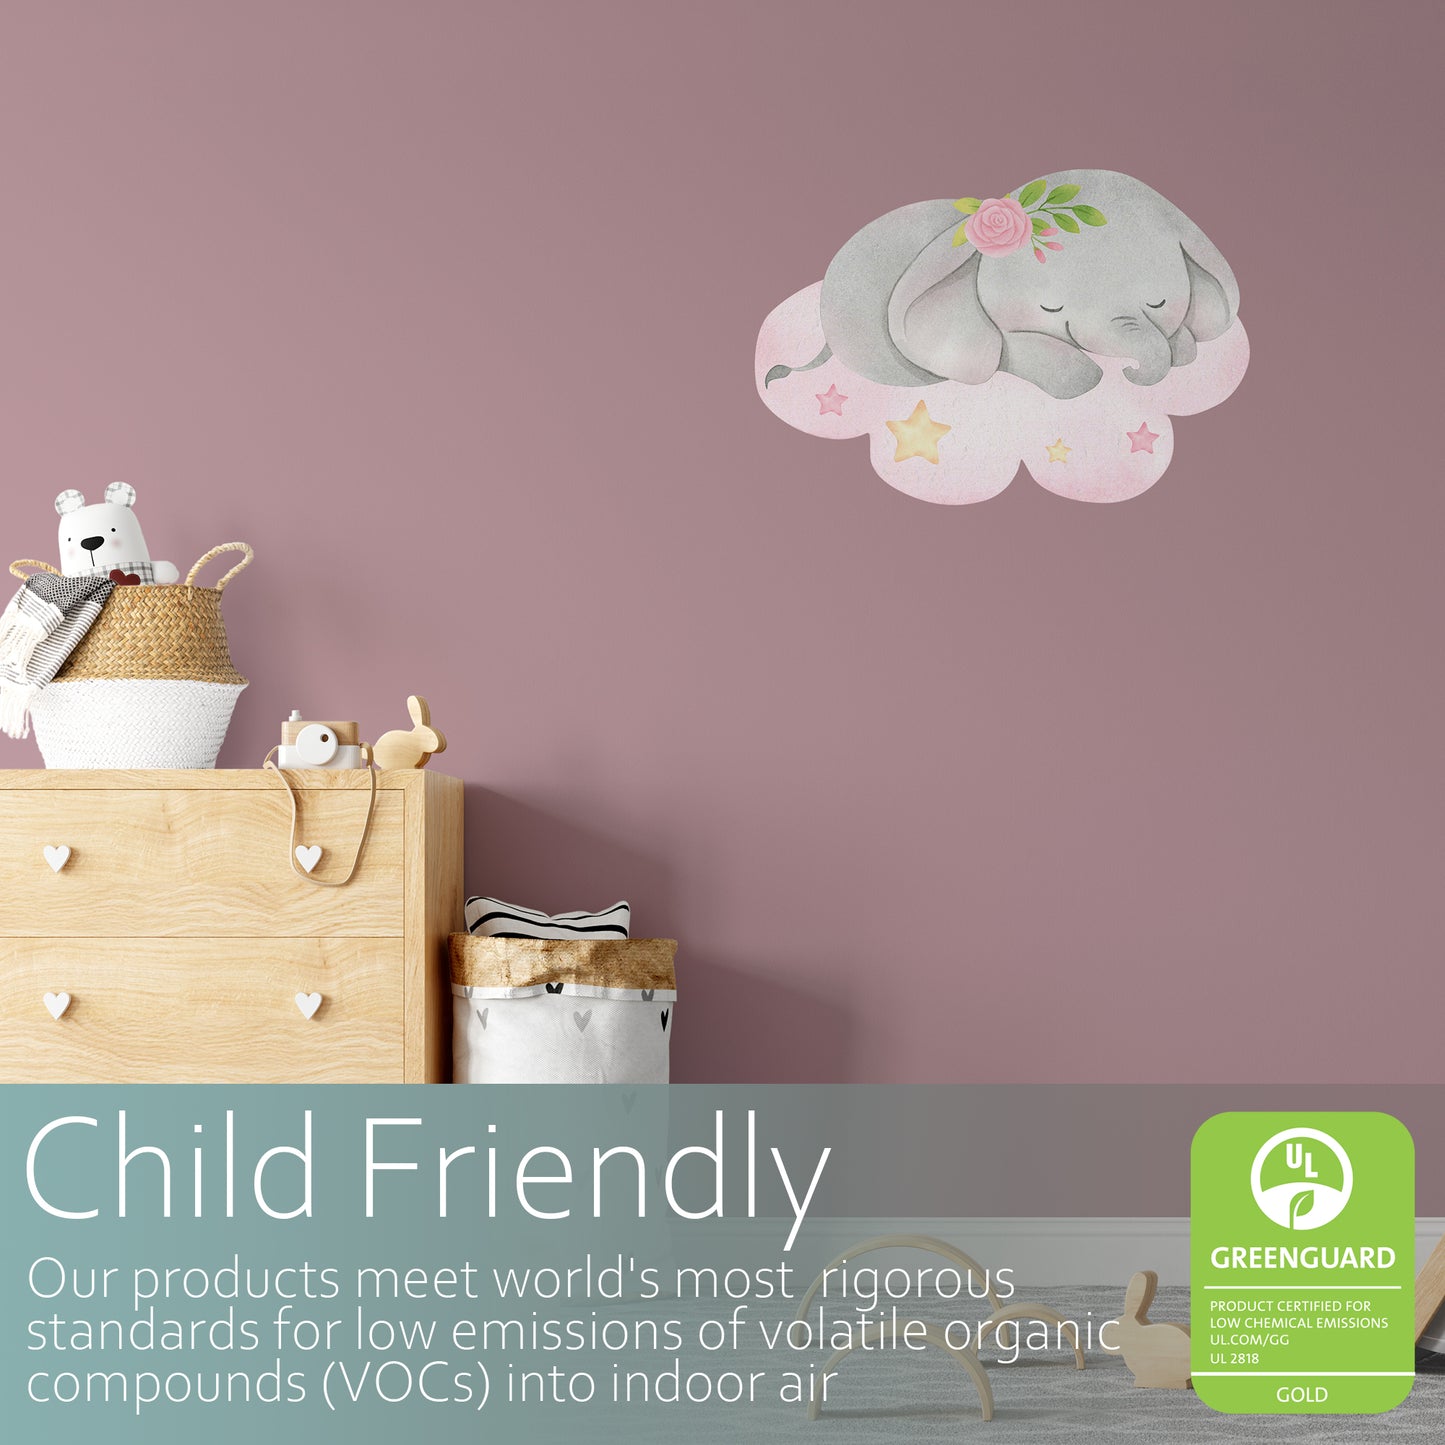 Watercolour baby elephant on a cloud | Fabric wall stickers